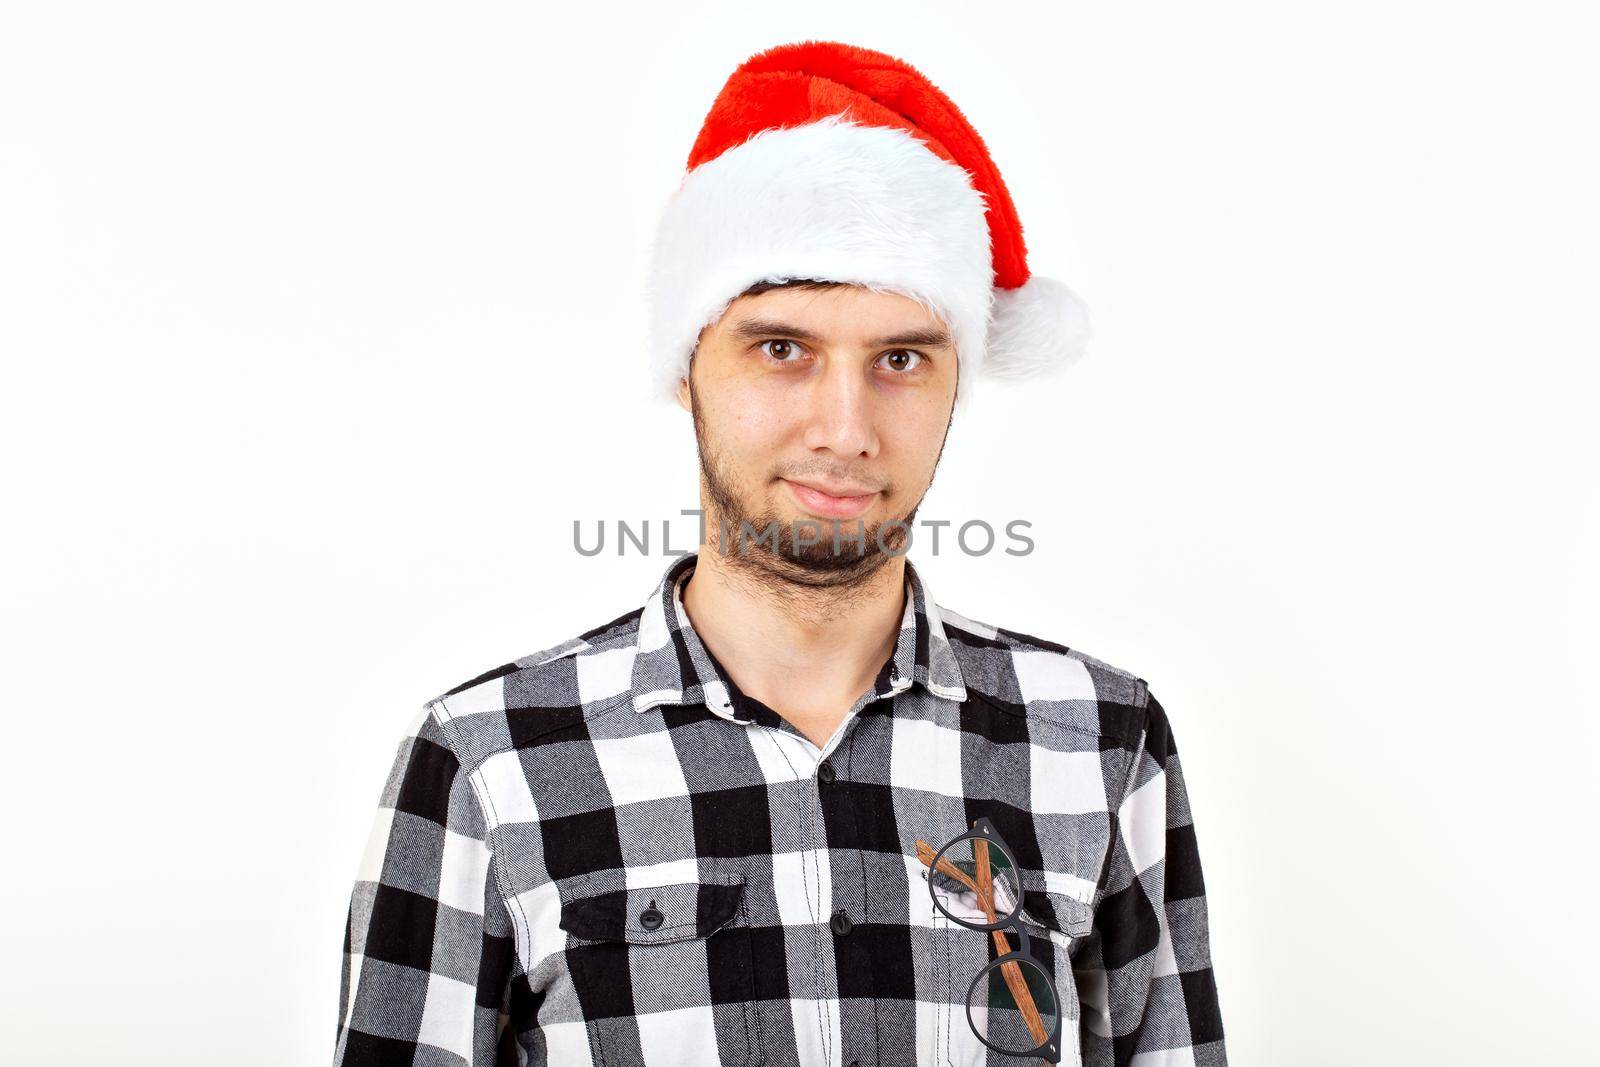 Holidays and presents concept - Funny man in Christmas hat on white background with copyspace.